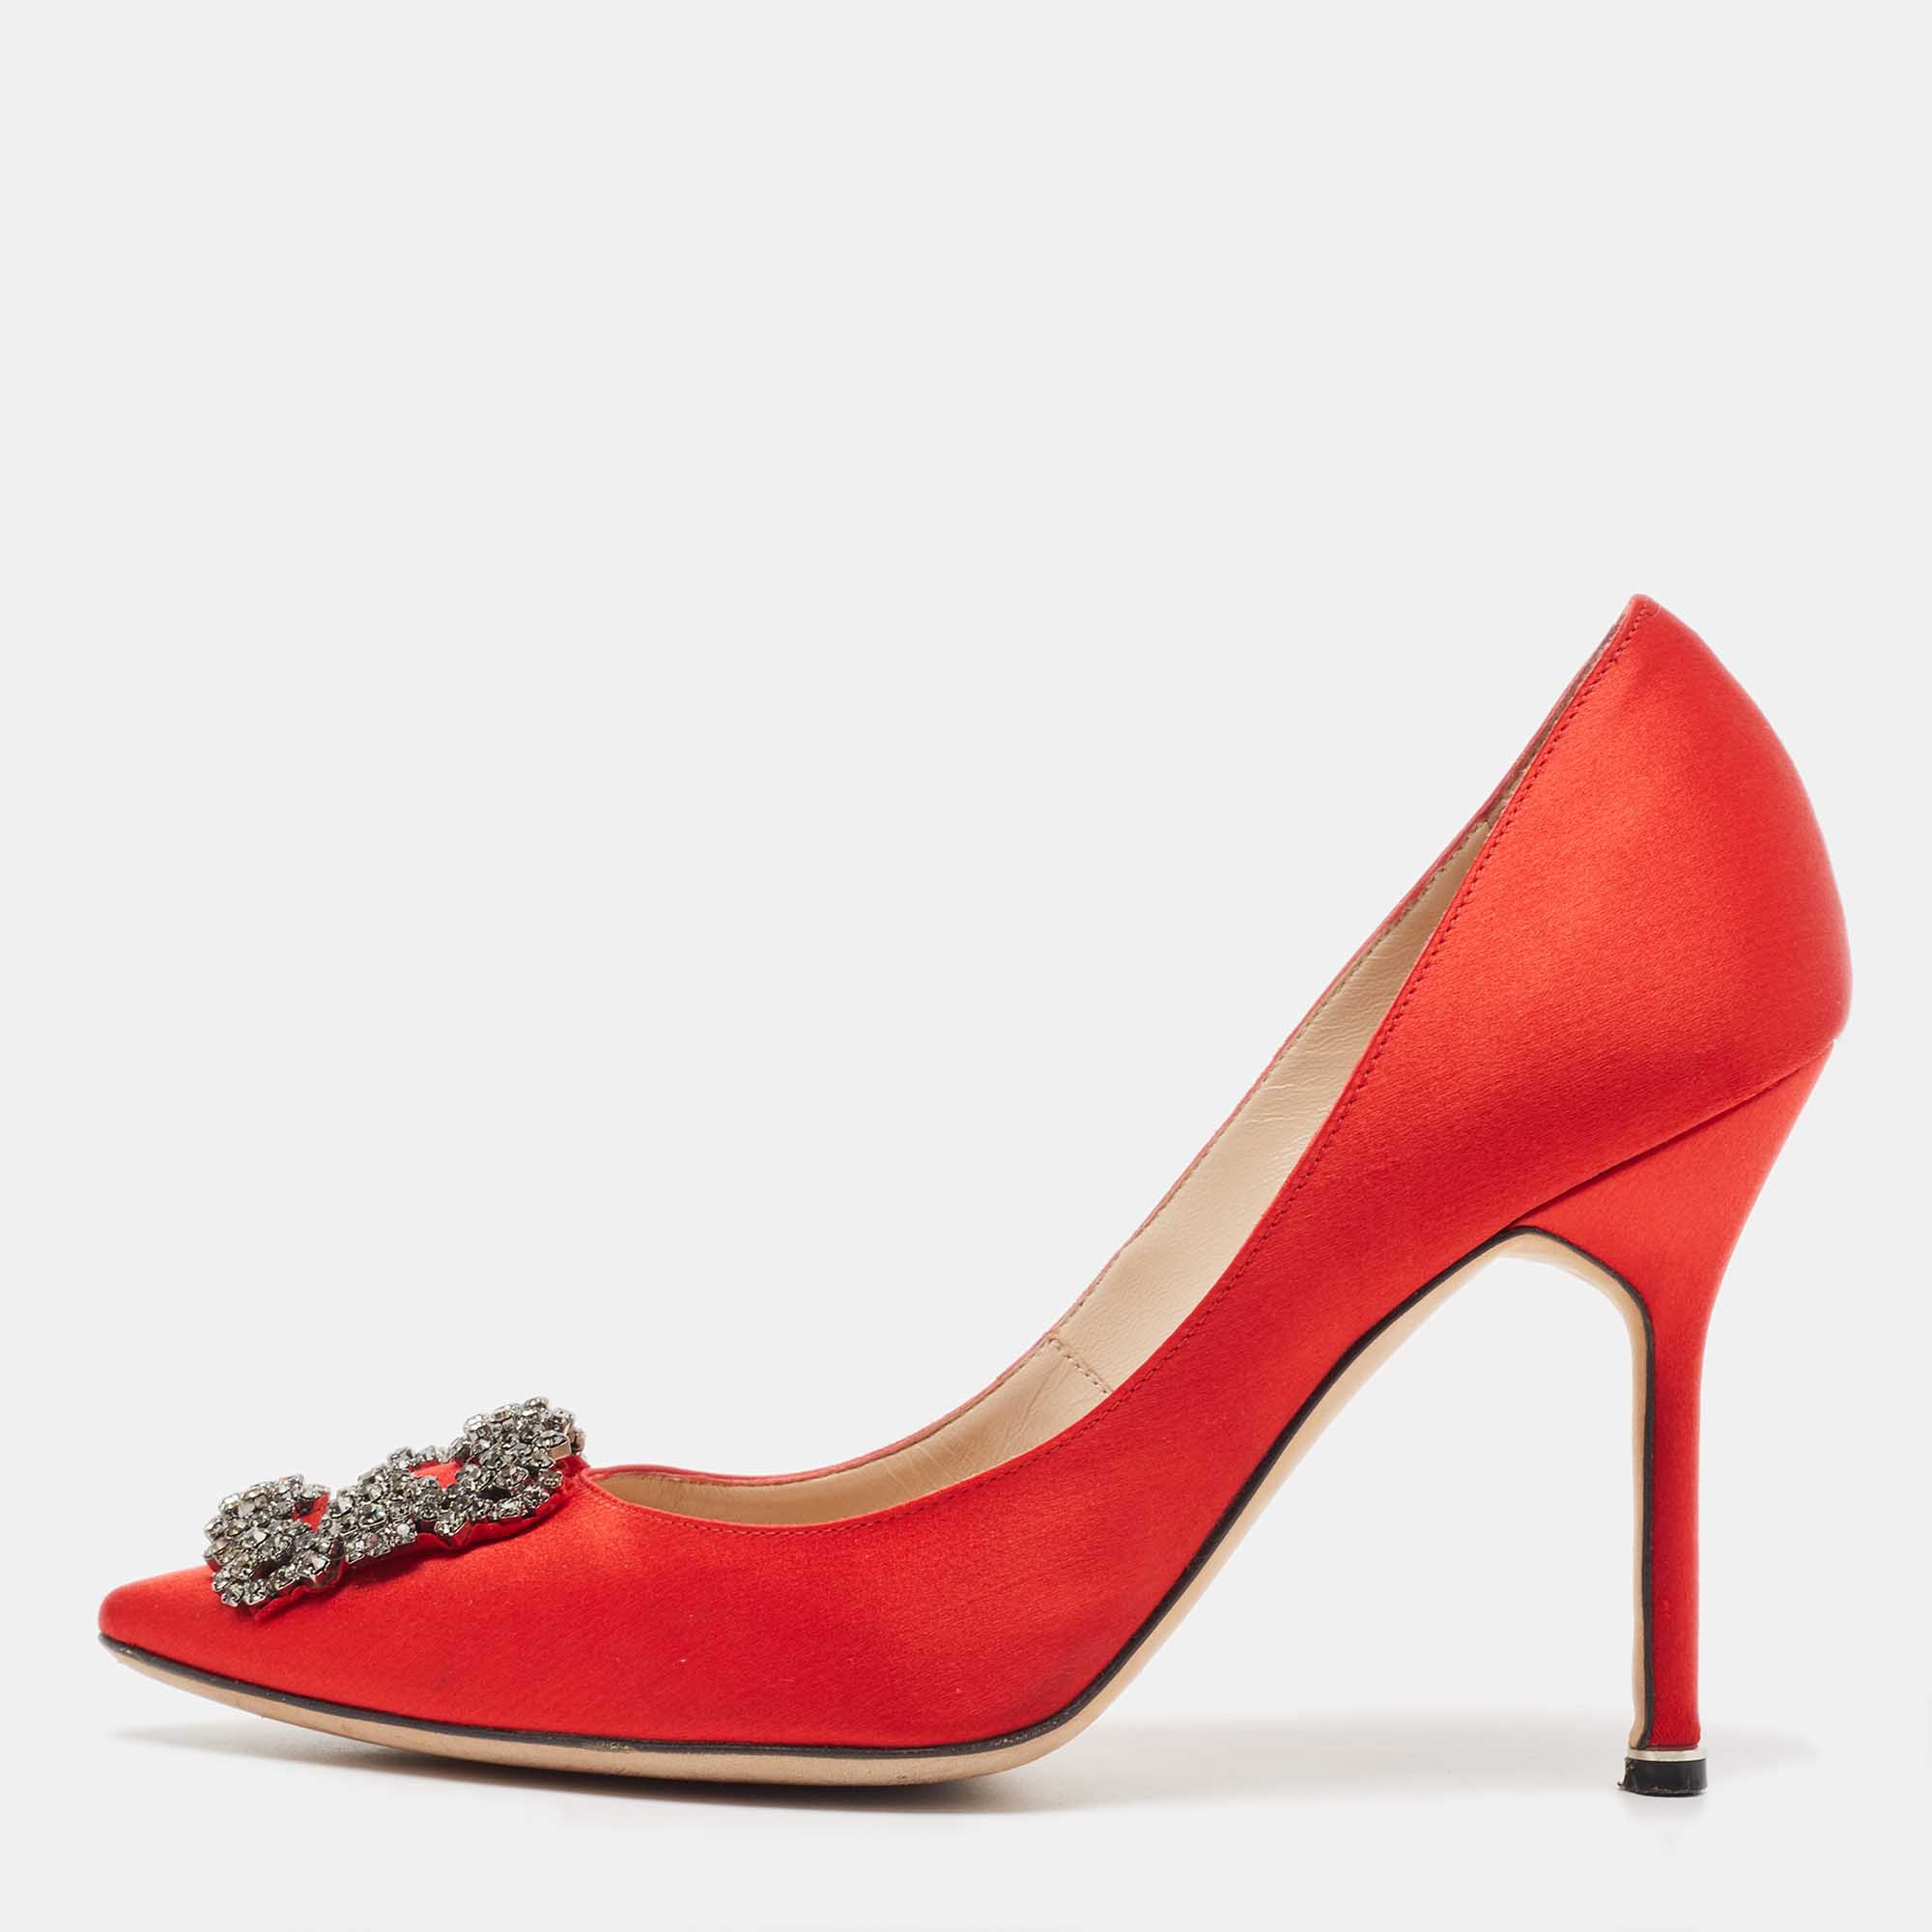 Pre-owned Manolo Blahnik Red Satin Hangisi Pumps Size 39